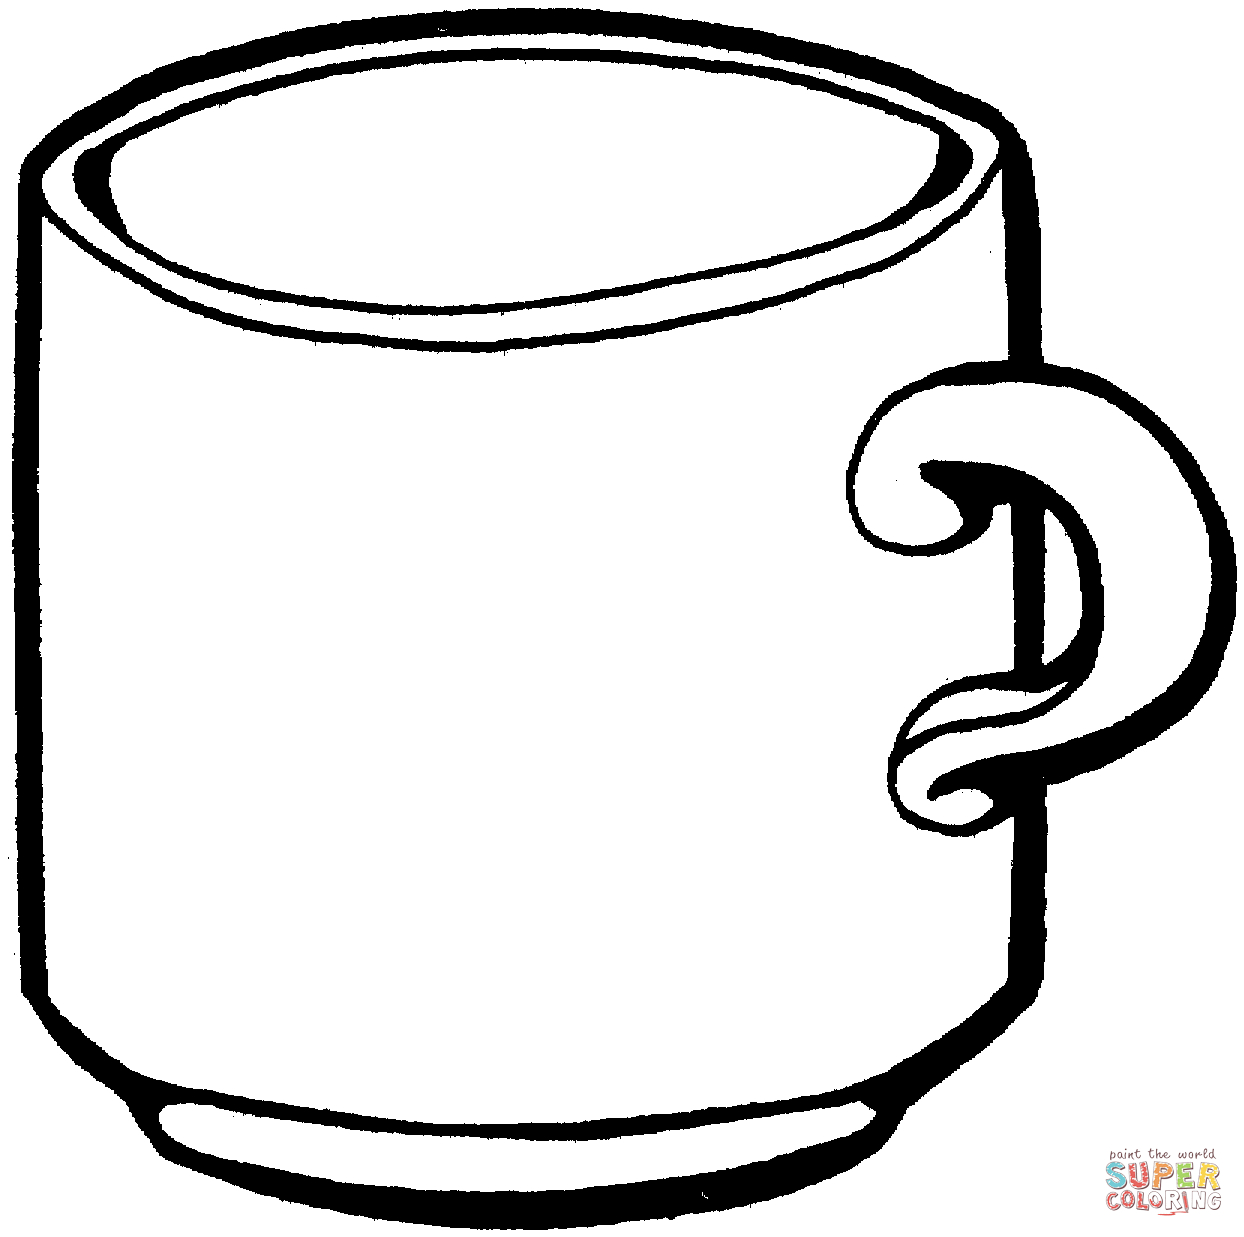 Teacup Coloring Pages To Print Tea Cup Coloring Page Free Printable Coloring Pages